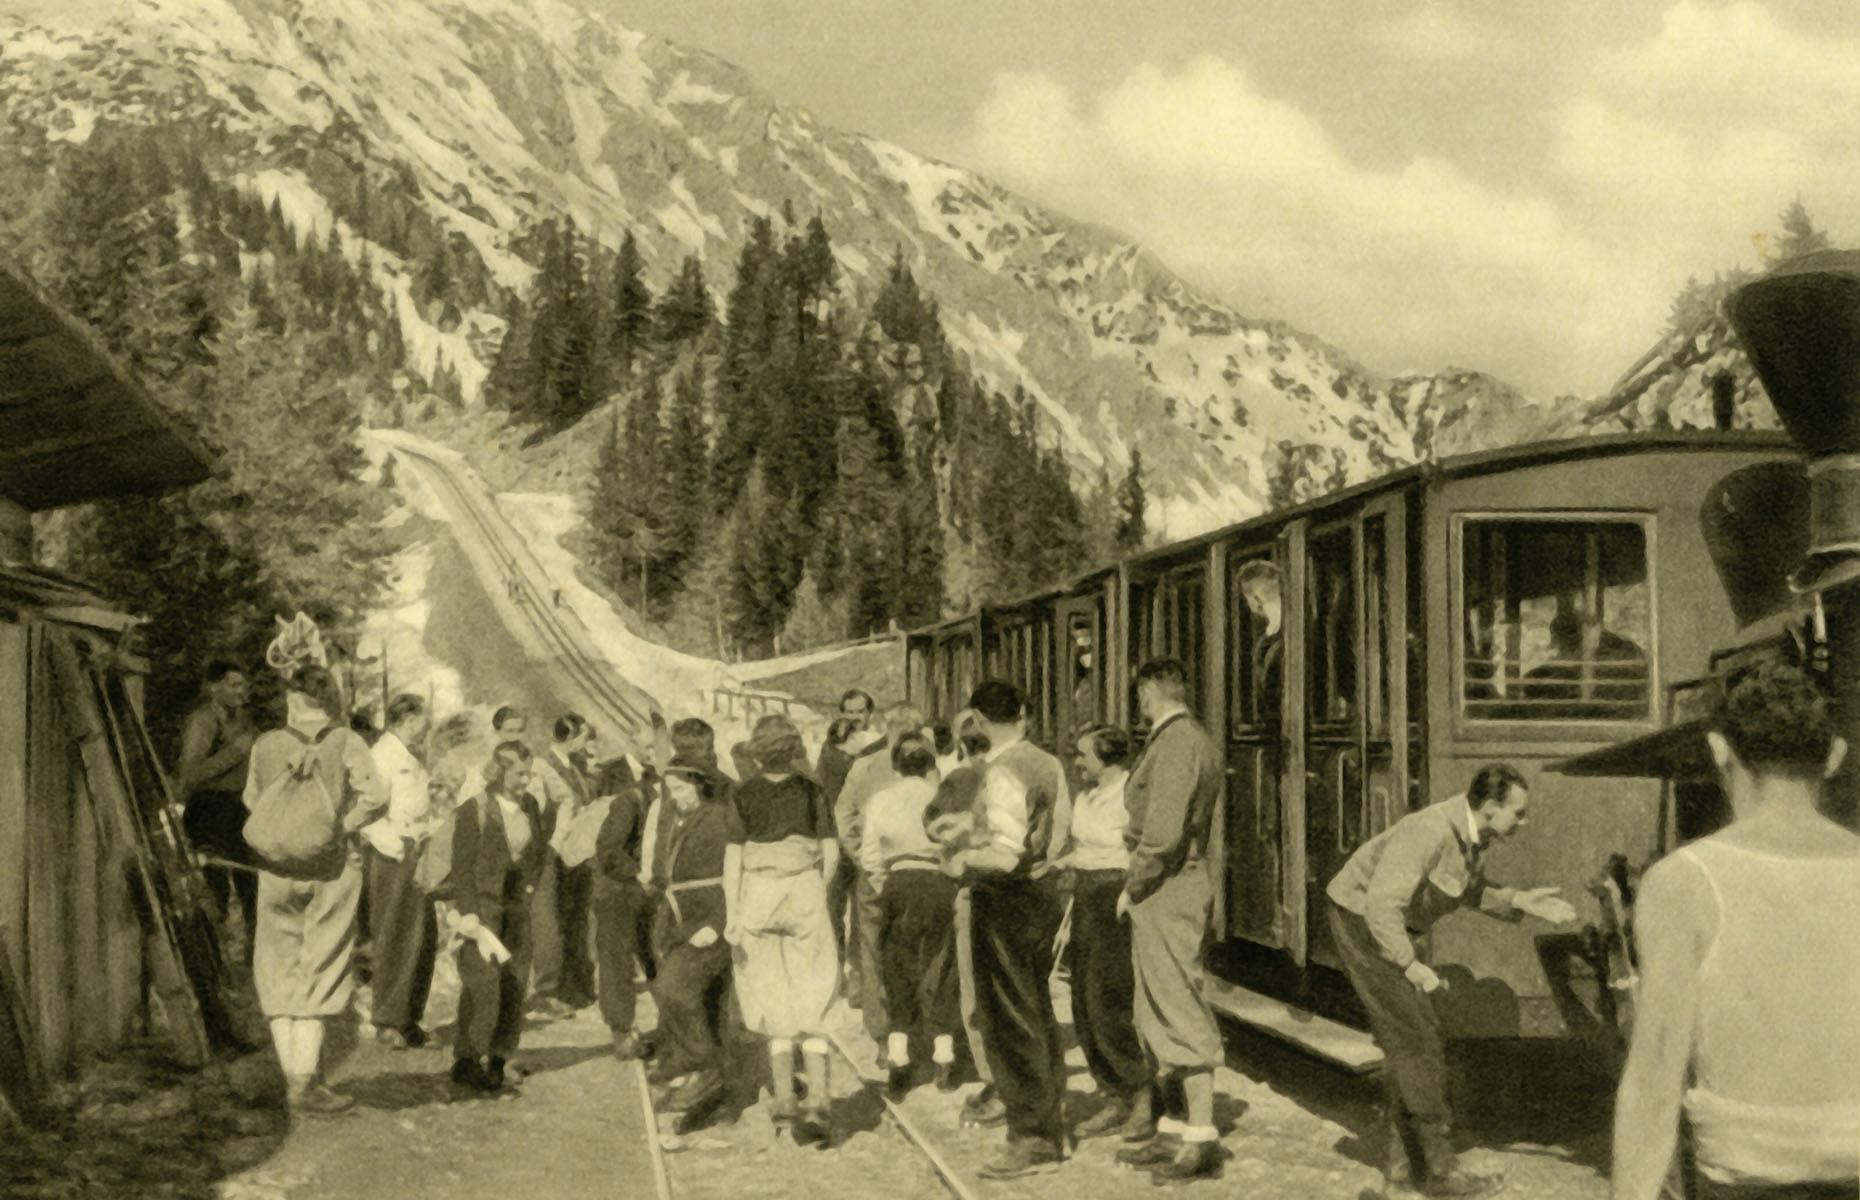 When tourism skyrocketed in the second half of the 19th century and areas around Vienna became popular with travellers from all across Europe, the mountainous Schneeberg region emerged as a favourite summer resort for the wealthy. Here are a group of hikers disembark the Schneeberg Railway at Baumgartnerhaus Station in 1935.